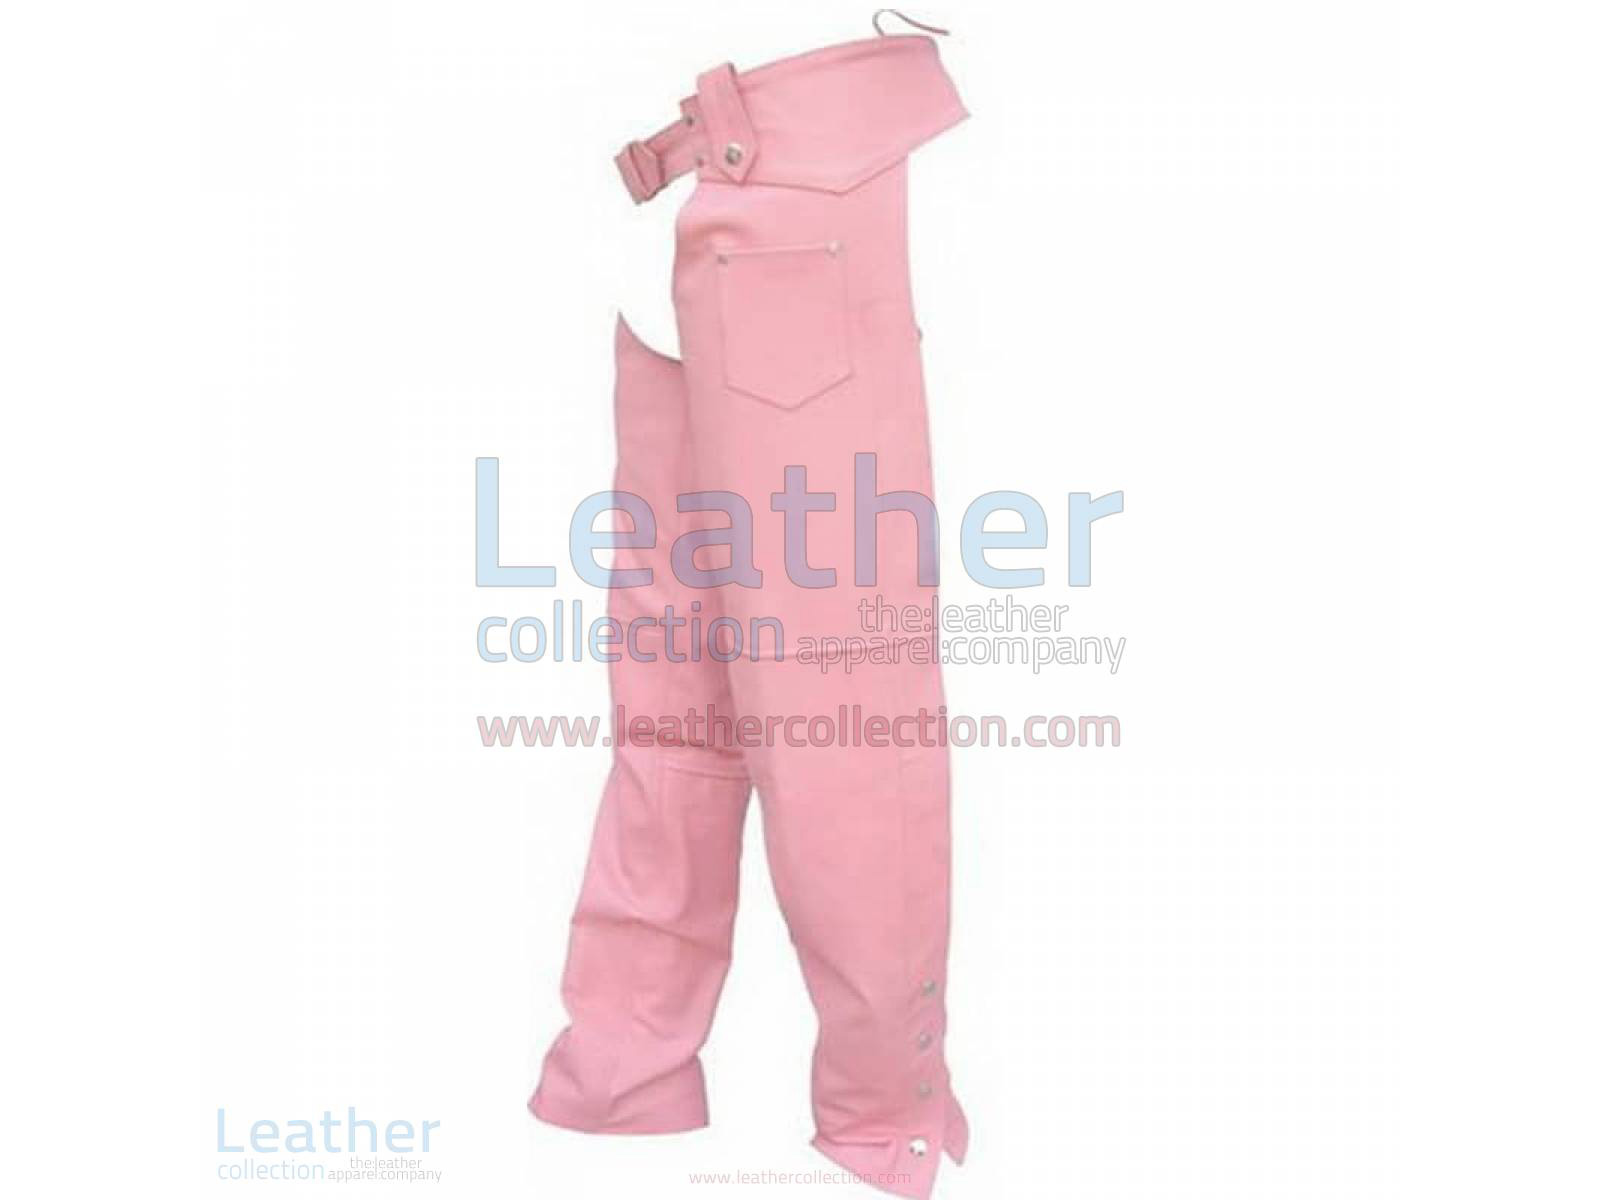 LADIES PINK LEATHER CHAPS